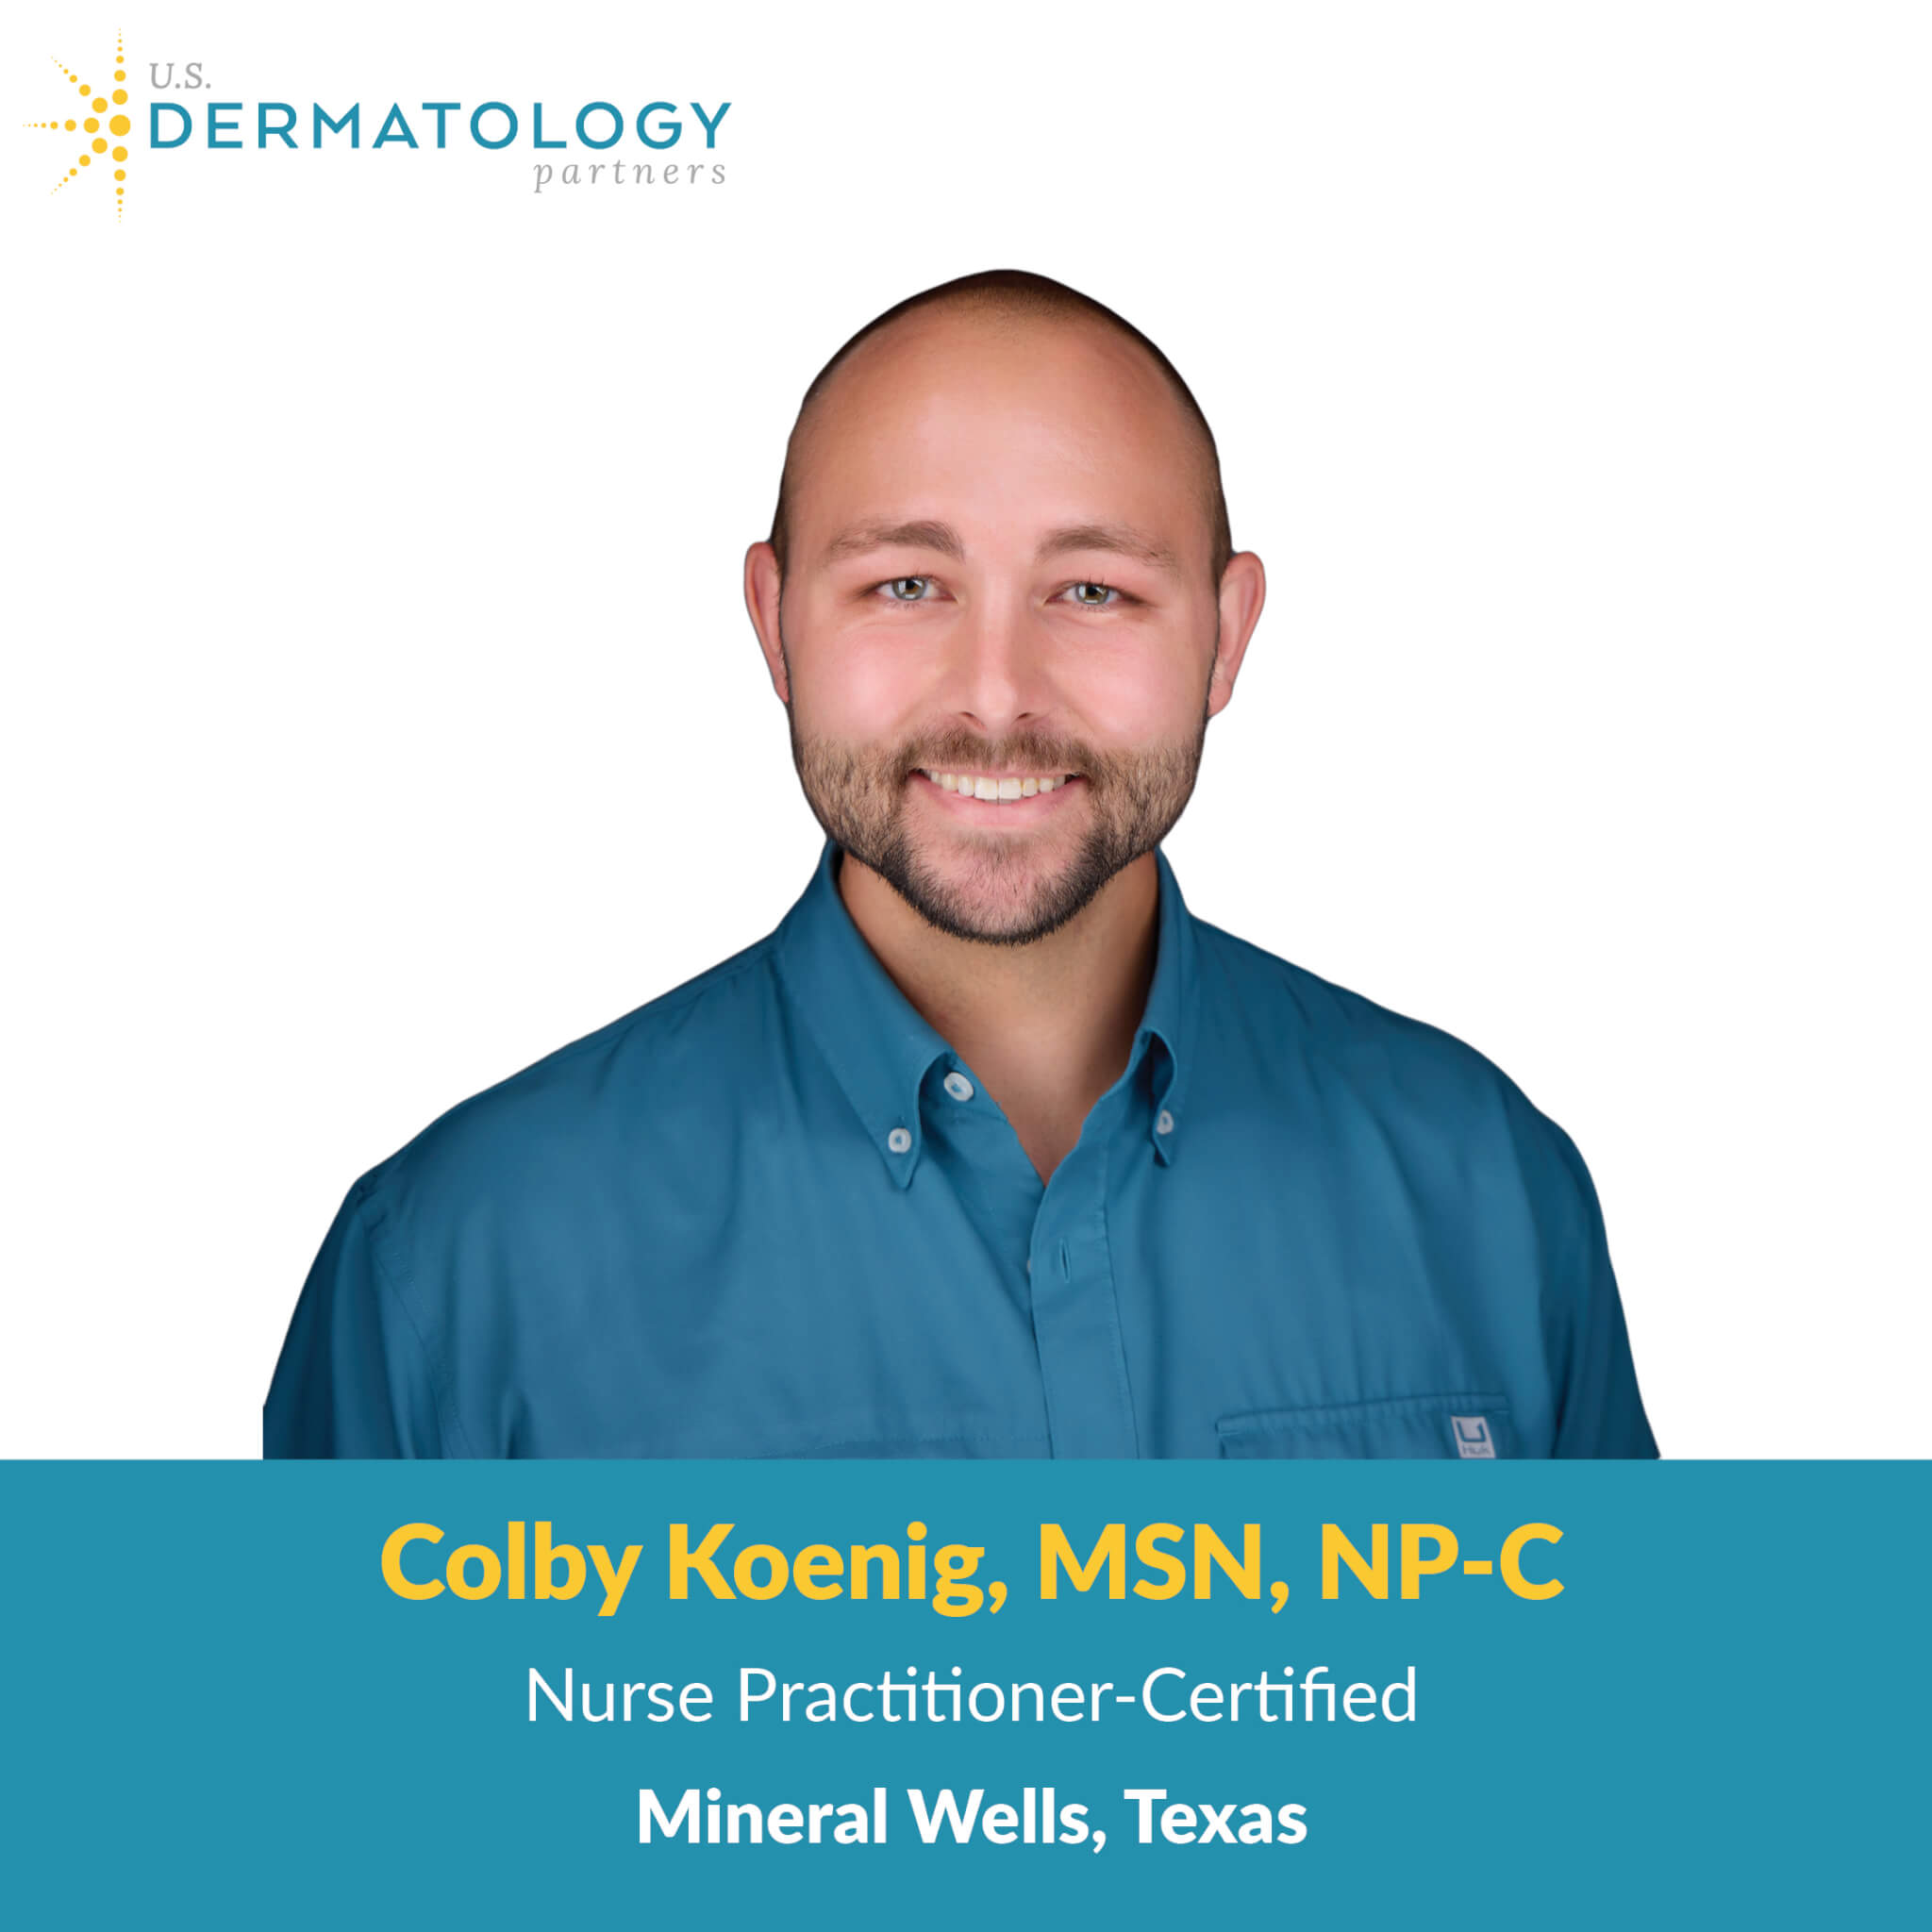 Colby Koenig is a Certified Family Nurse Practitioner at U.S. Dermatology Partners in Mineral Wells, Texas. Now accepting new patients!